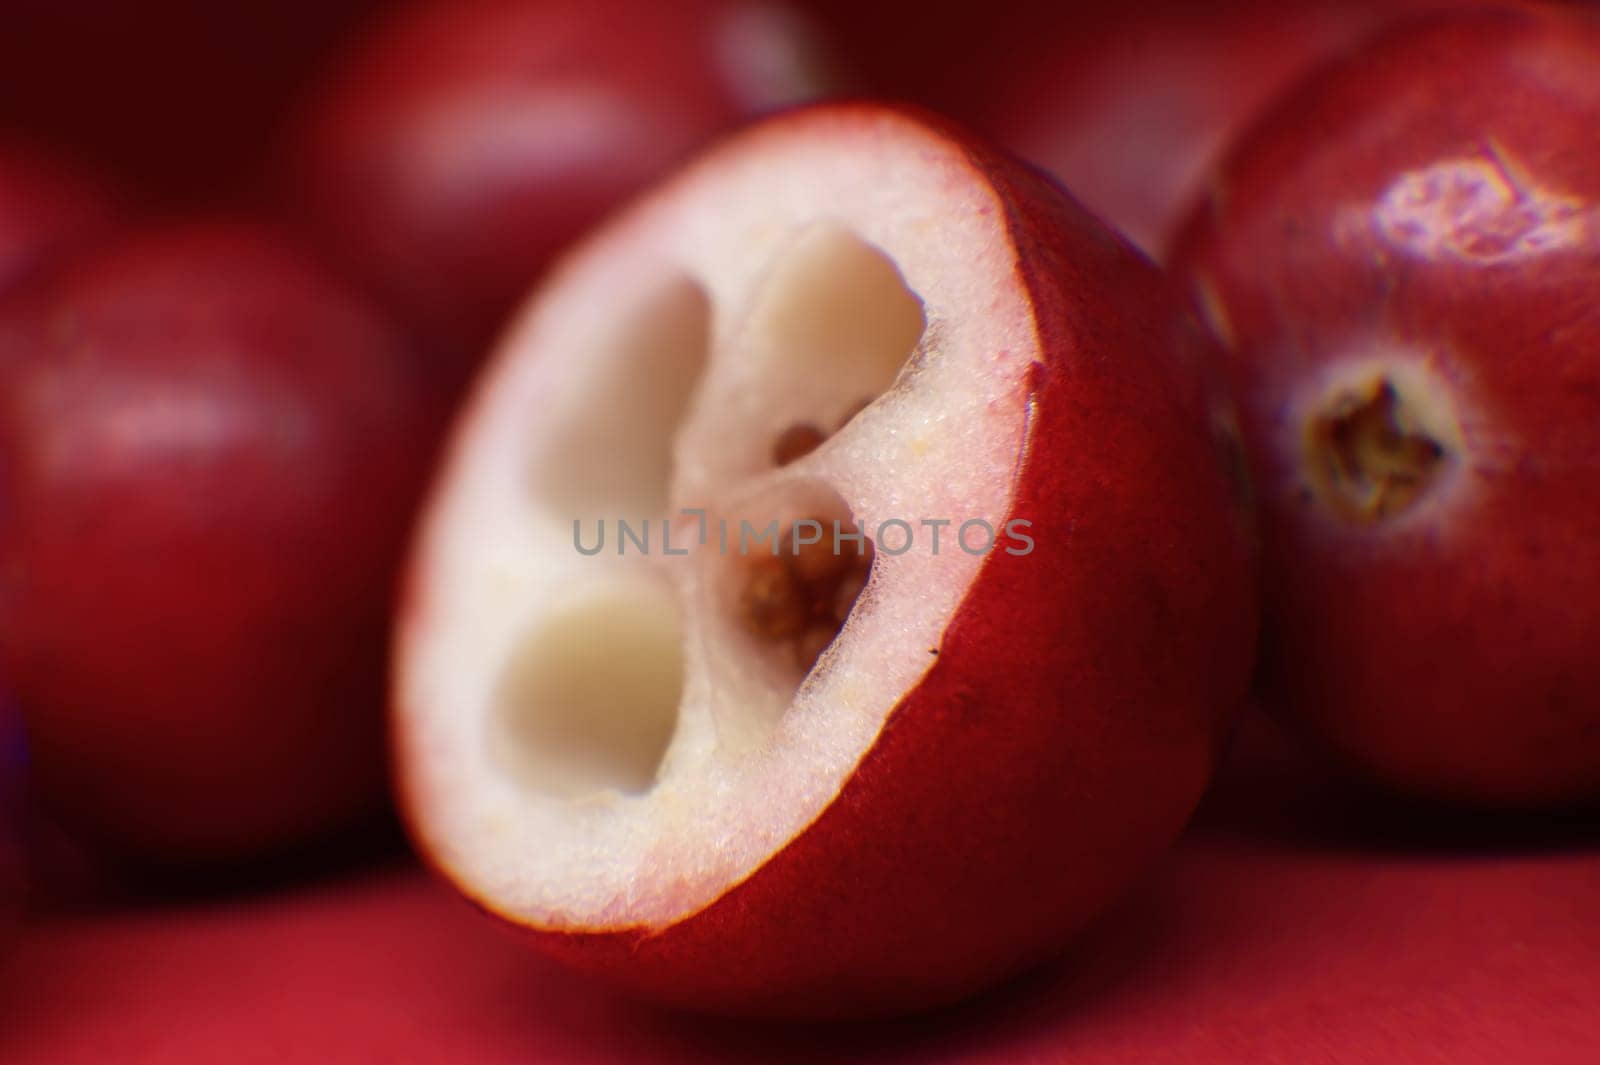 Macro of a cranberry cut in half, revealing a white interior with red seed